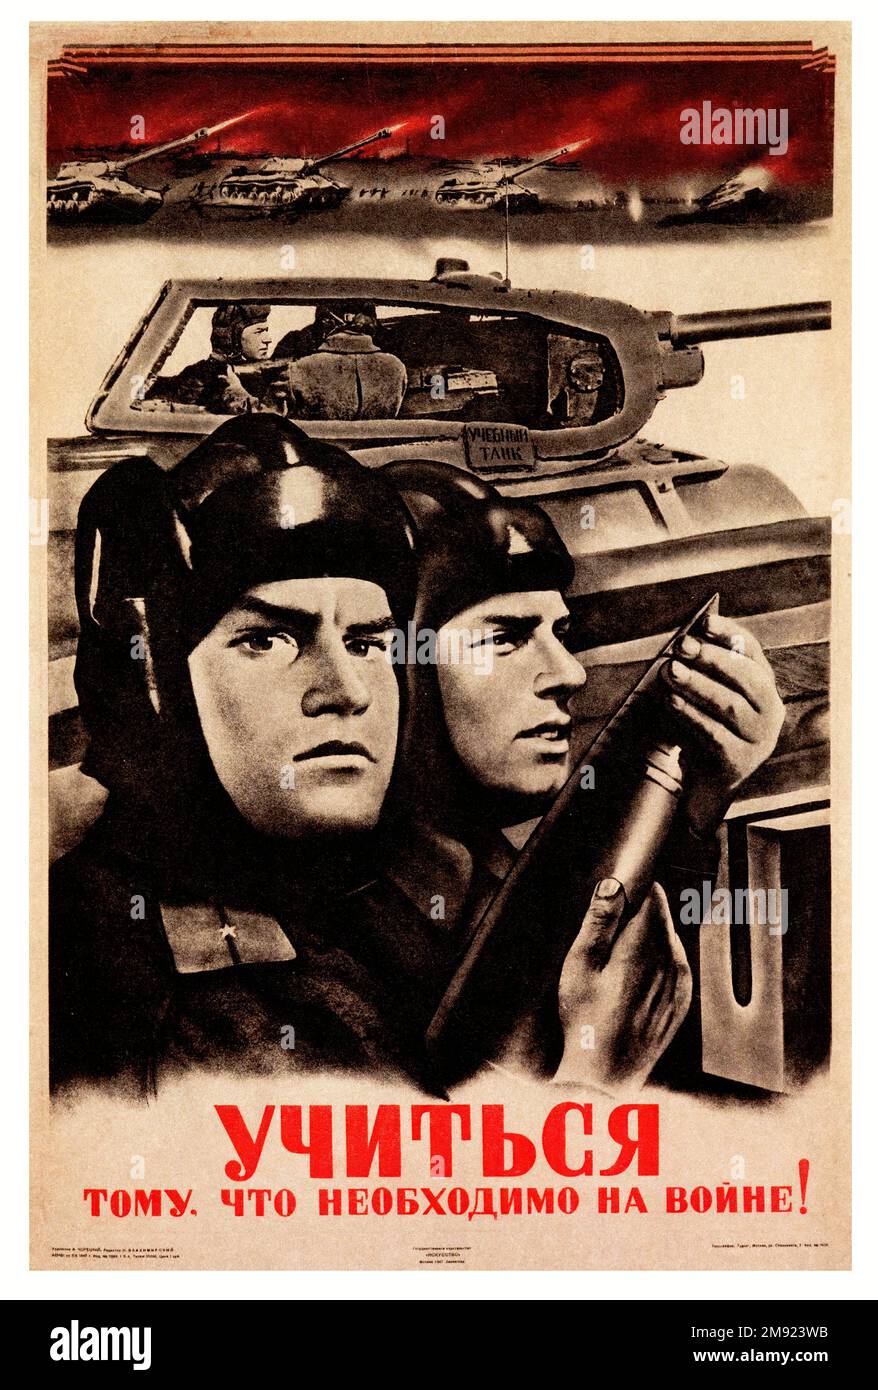 Learn All that Is Necessary for Warfare 1947    -  (Translated from Russian) - Vintage USSR soviet propaganda poster Stock Photo